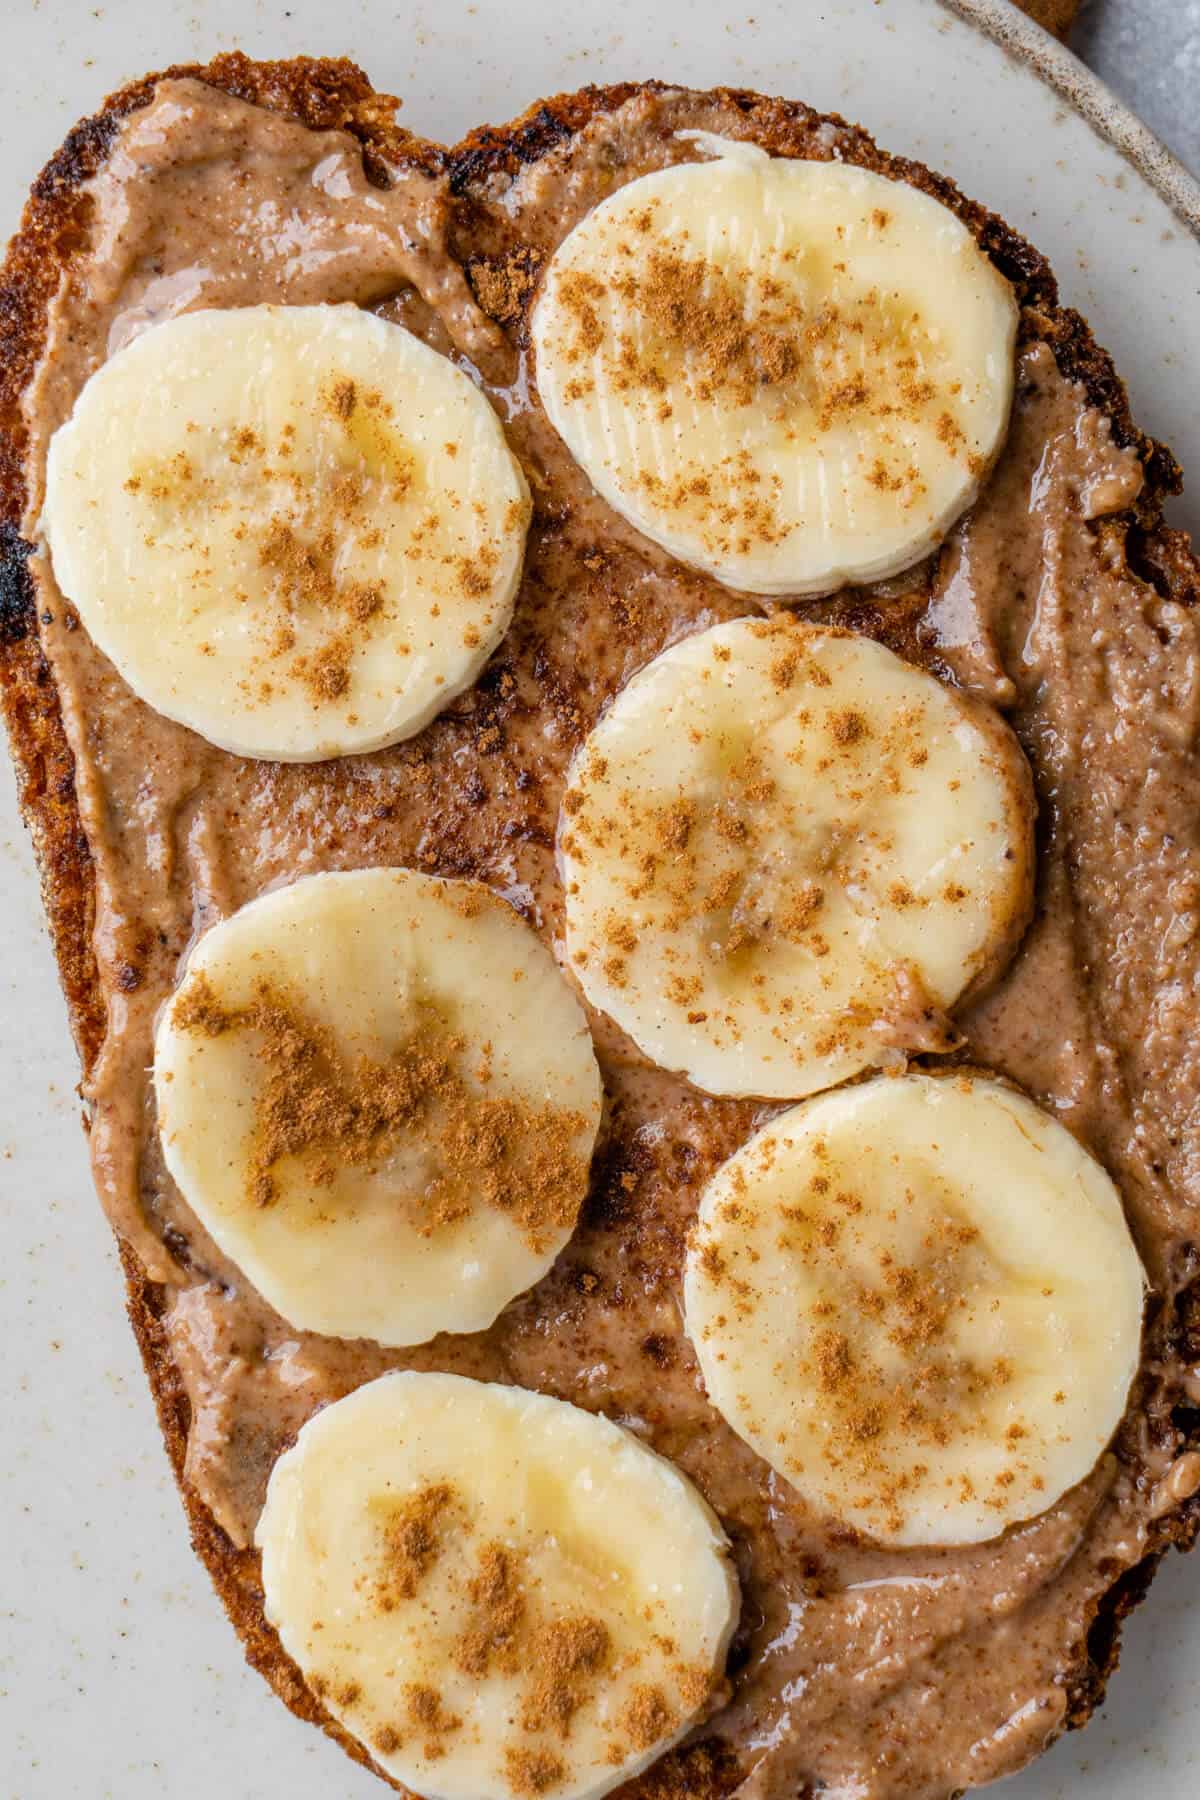 Toast with almond butter, banana and cinnamon